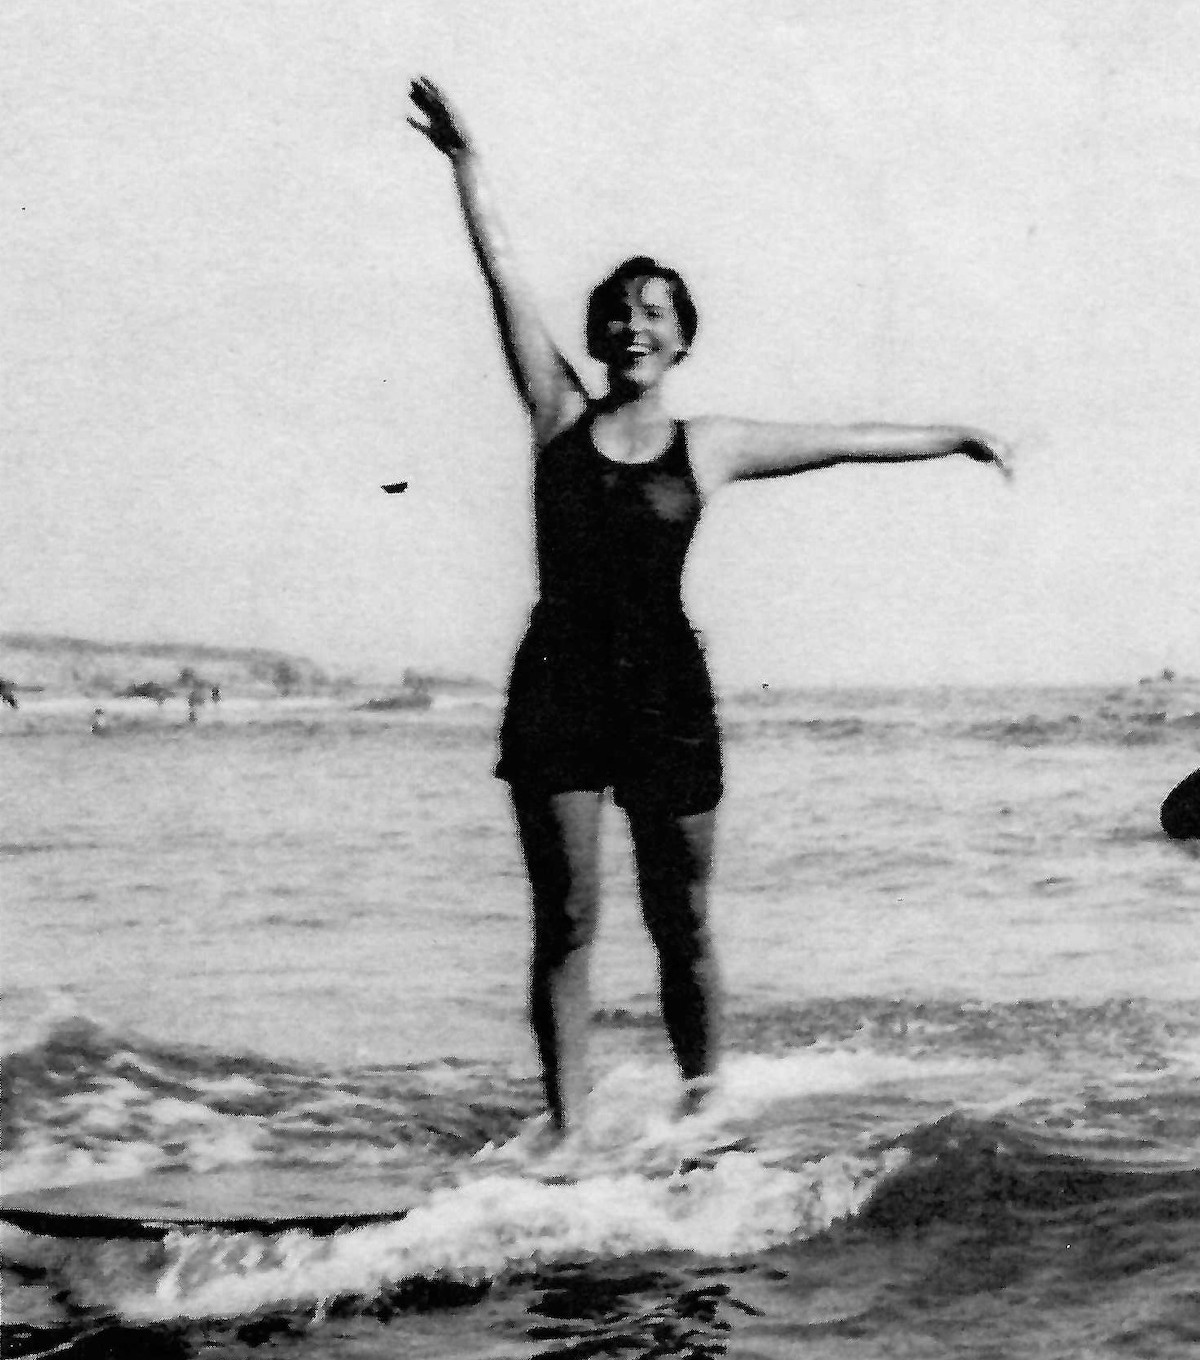 Evening Lecture: The Roaring 20s - The Glory Days of Surfing in Corona del Mar